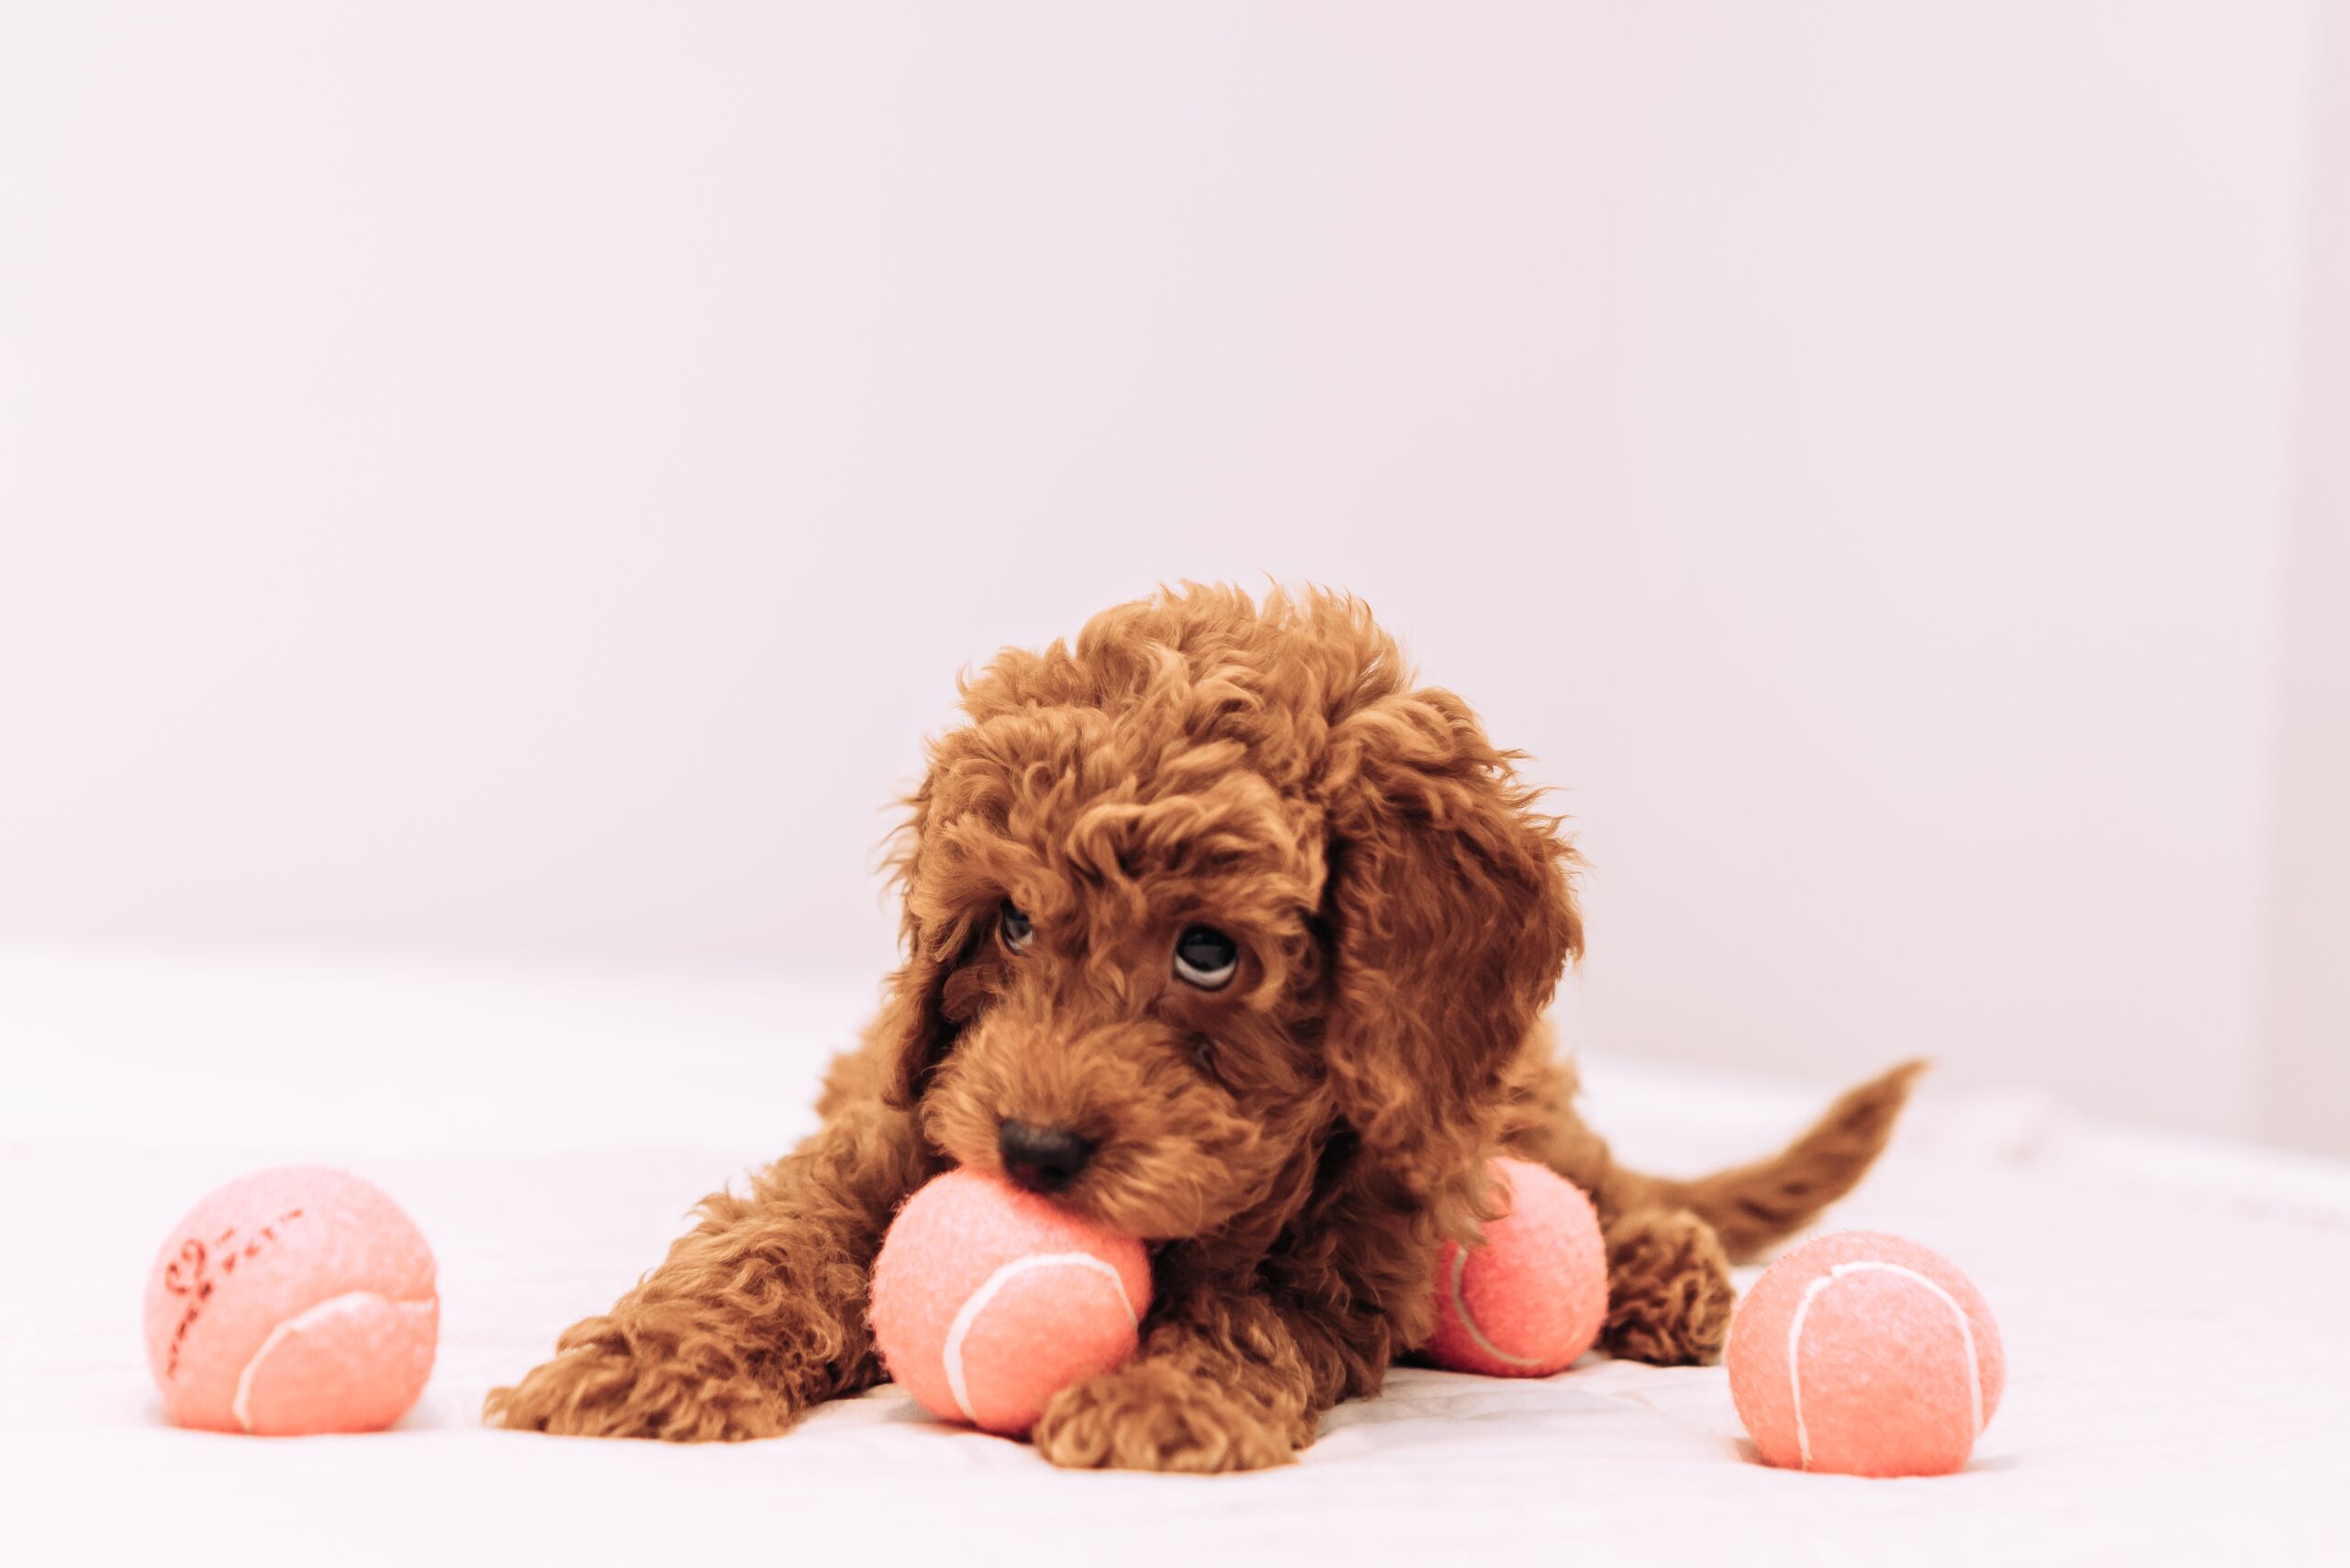 A goldendoodle puppy playing with tennis balls